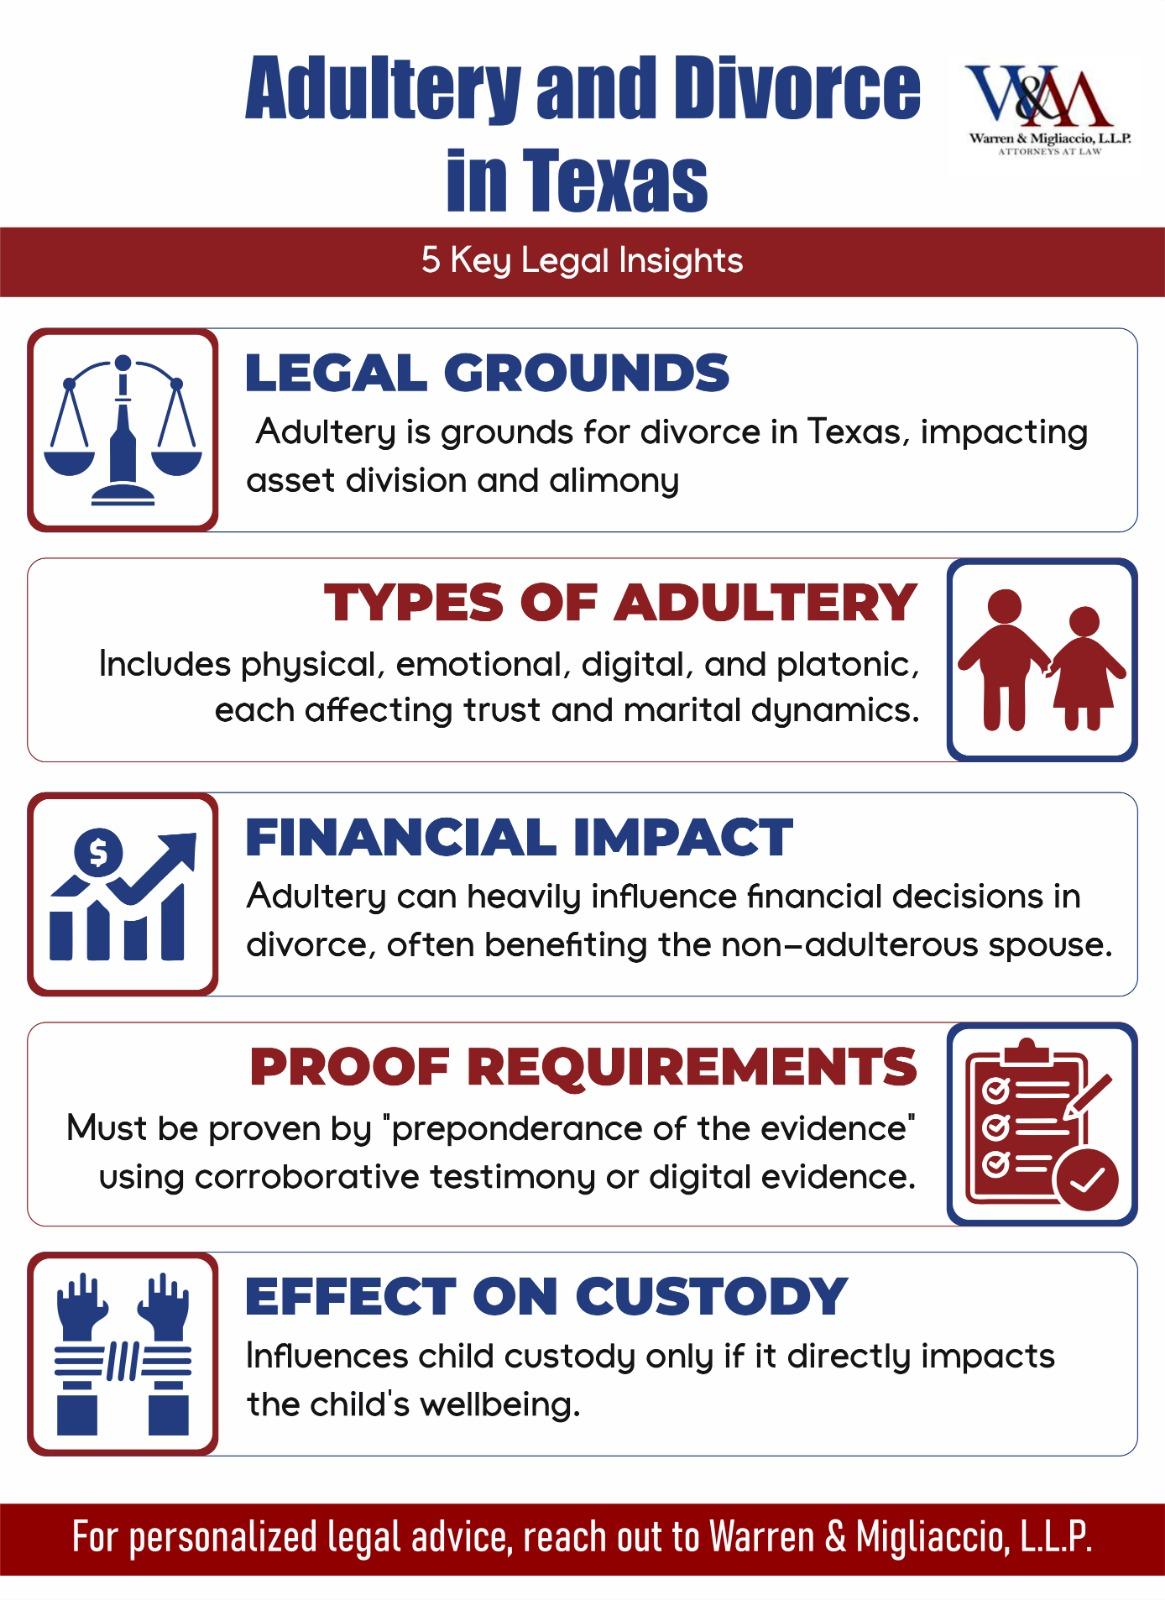 Informational poster detailing legal aspects of adultery and divorce in Texas, including grounds, types, financial impact, proof requirements, and custody implications. Contact information is provided at the bottom.